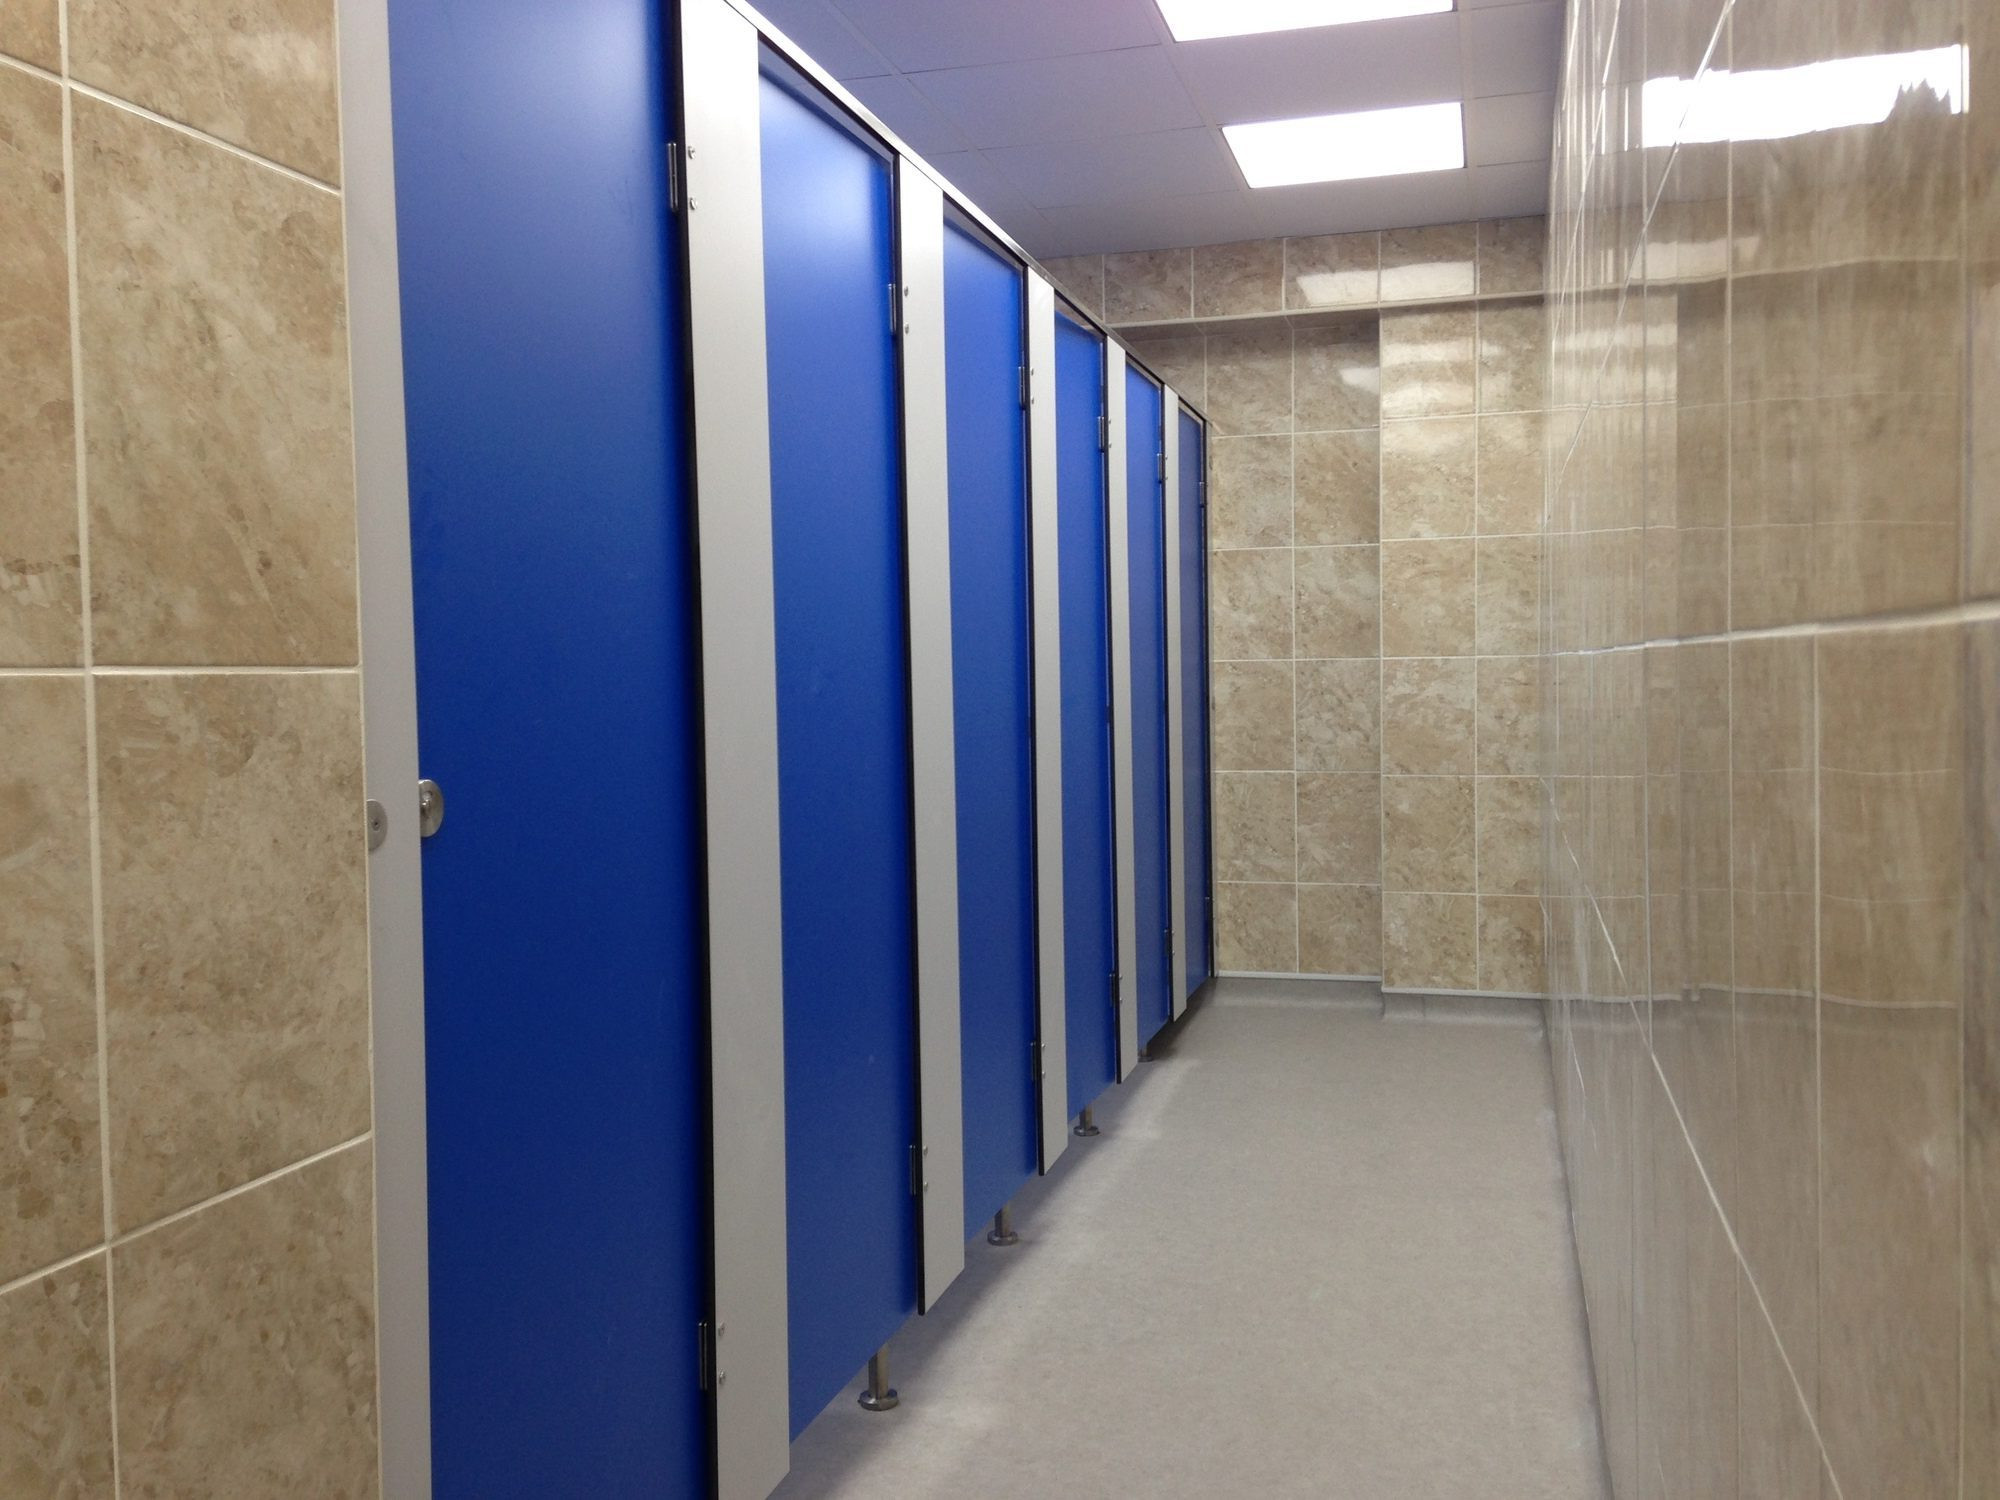 Toilet refurbishment for Bournemouth and Poole College.